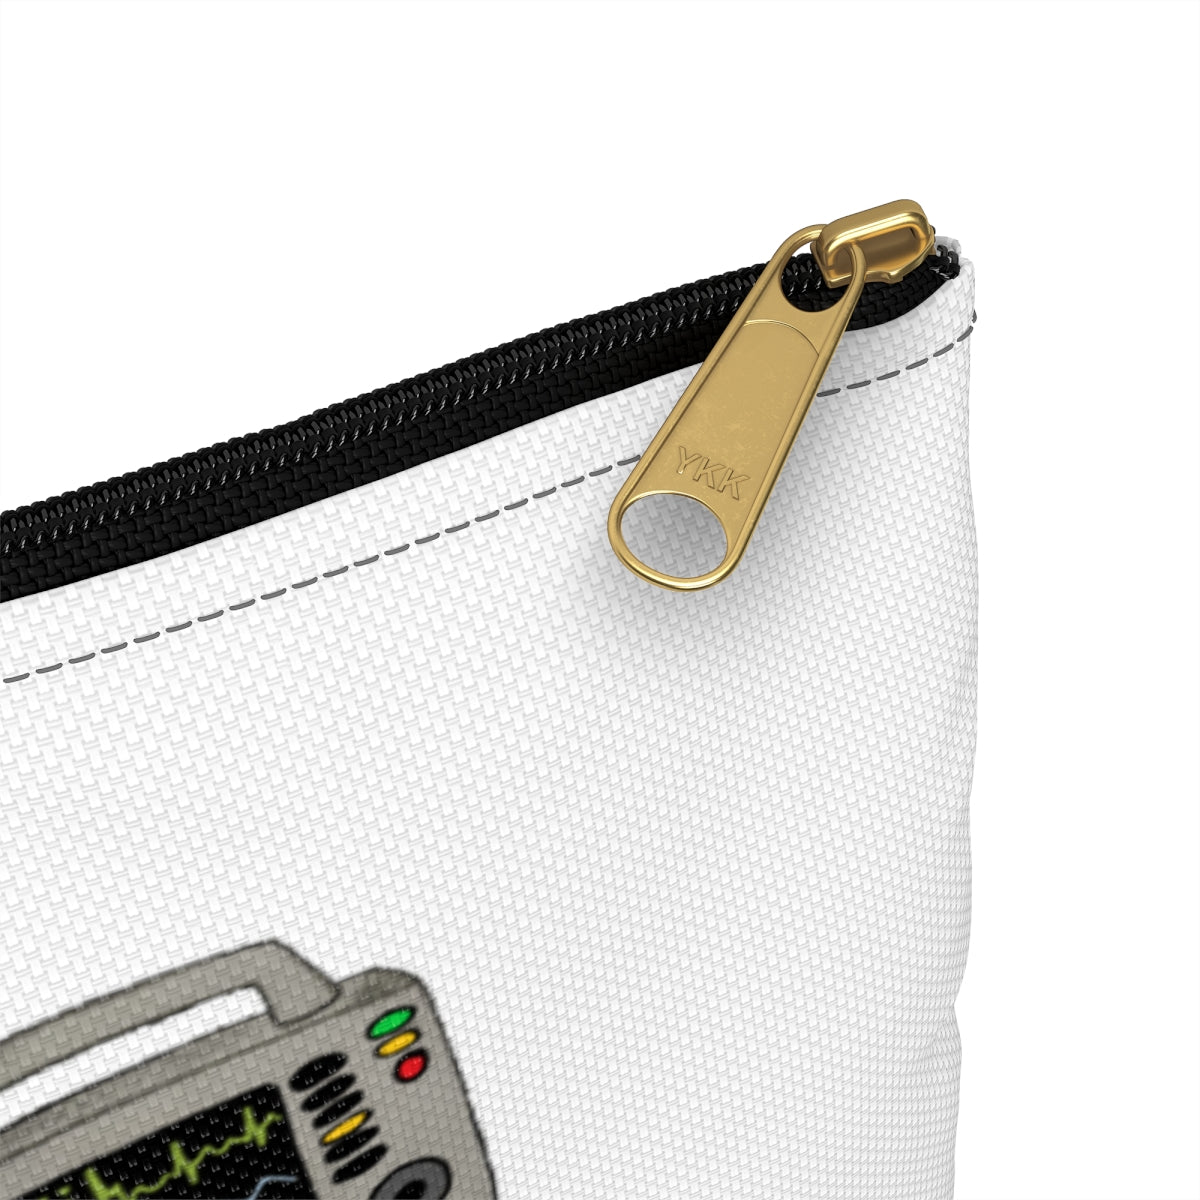 Cardioversion of Fun Accessory Pouch